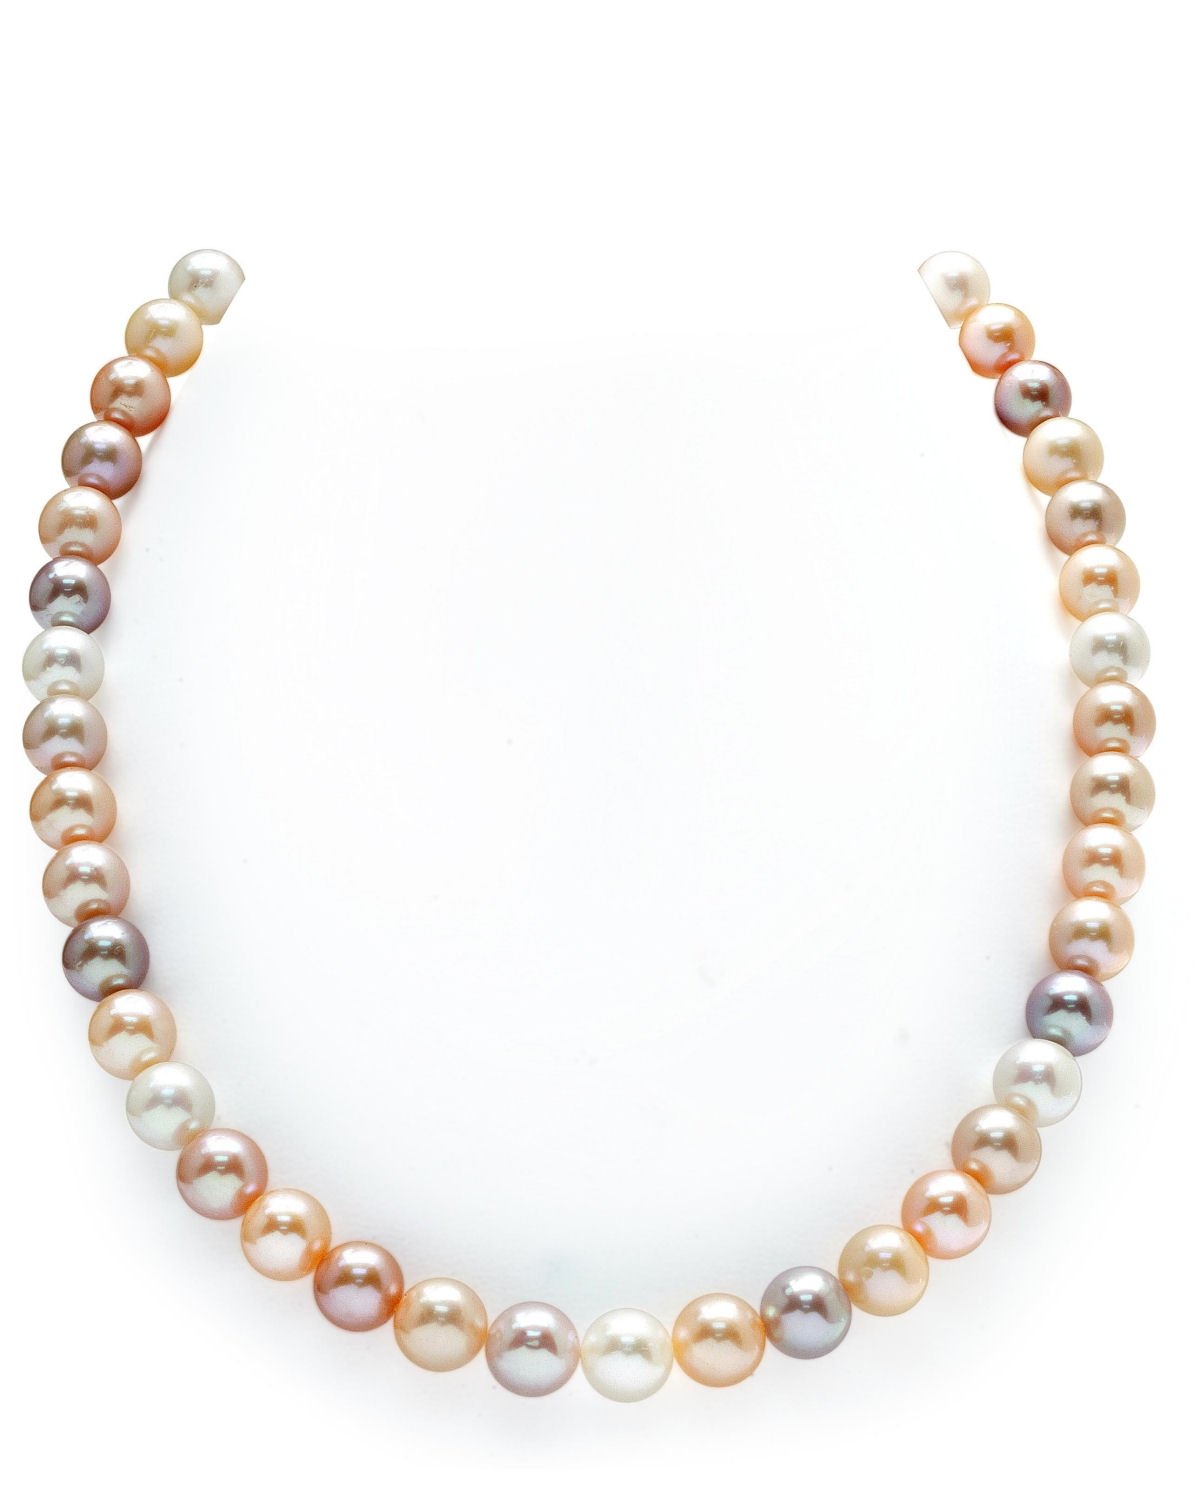 Peach Freshwater Pearl 10.5-11.5mm Smooth Round AAA Grade Pearl Beads Lot -  159544